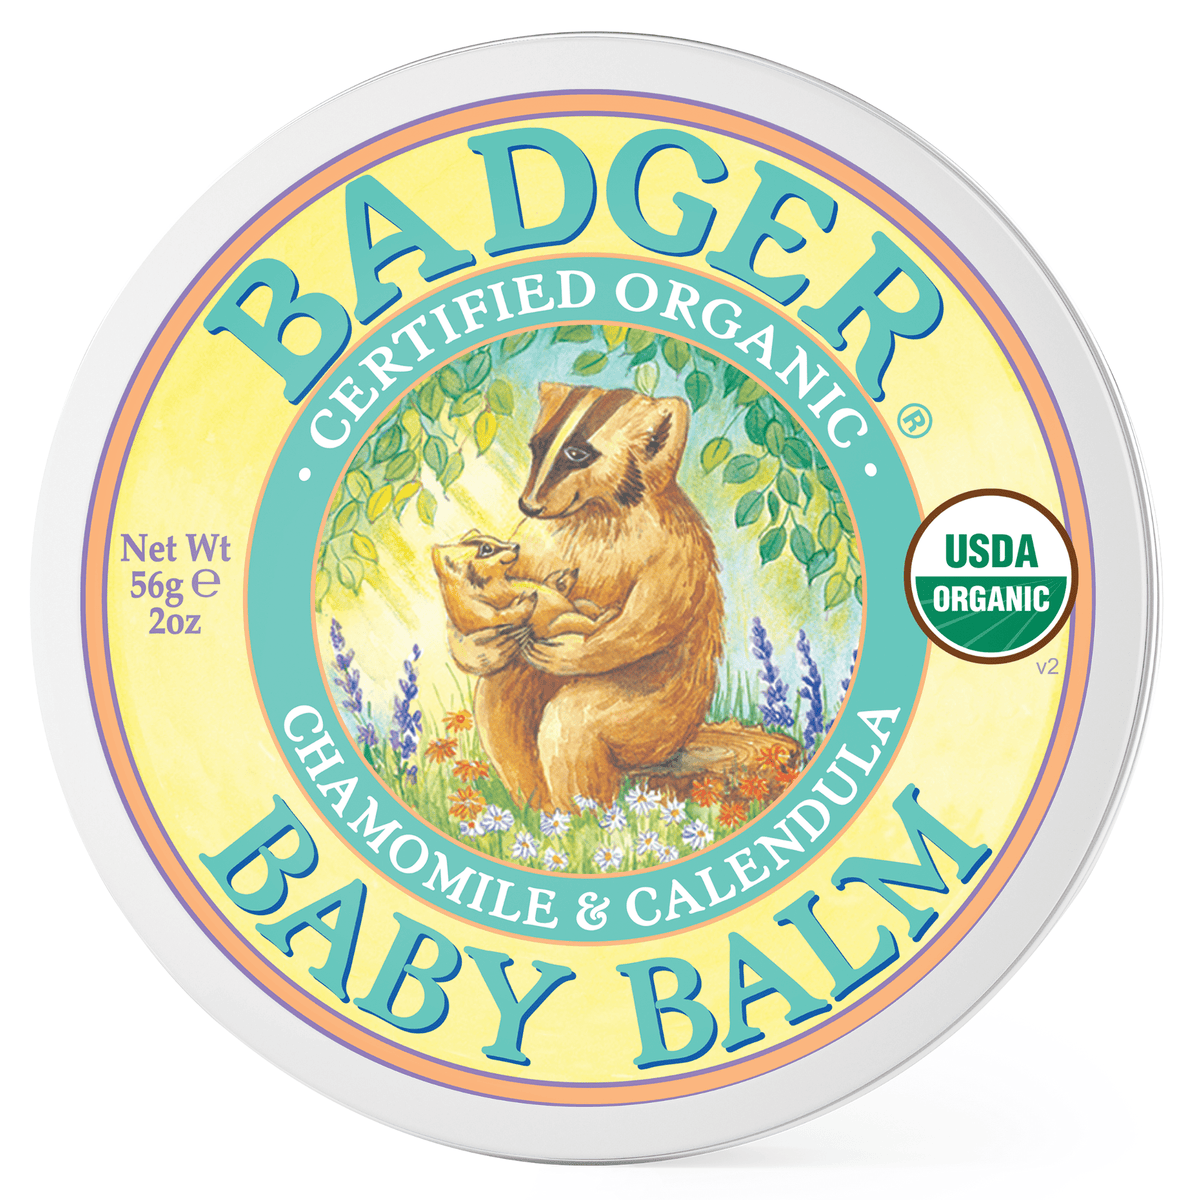 Primary Image of Baby Balm Large Tin